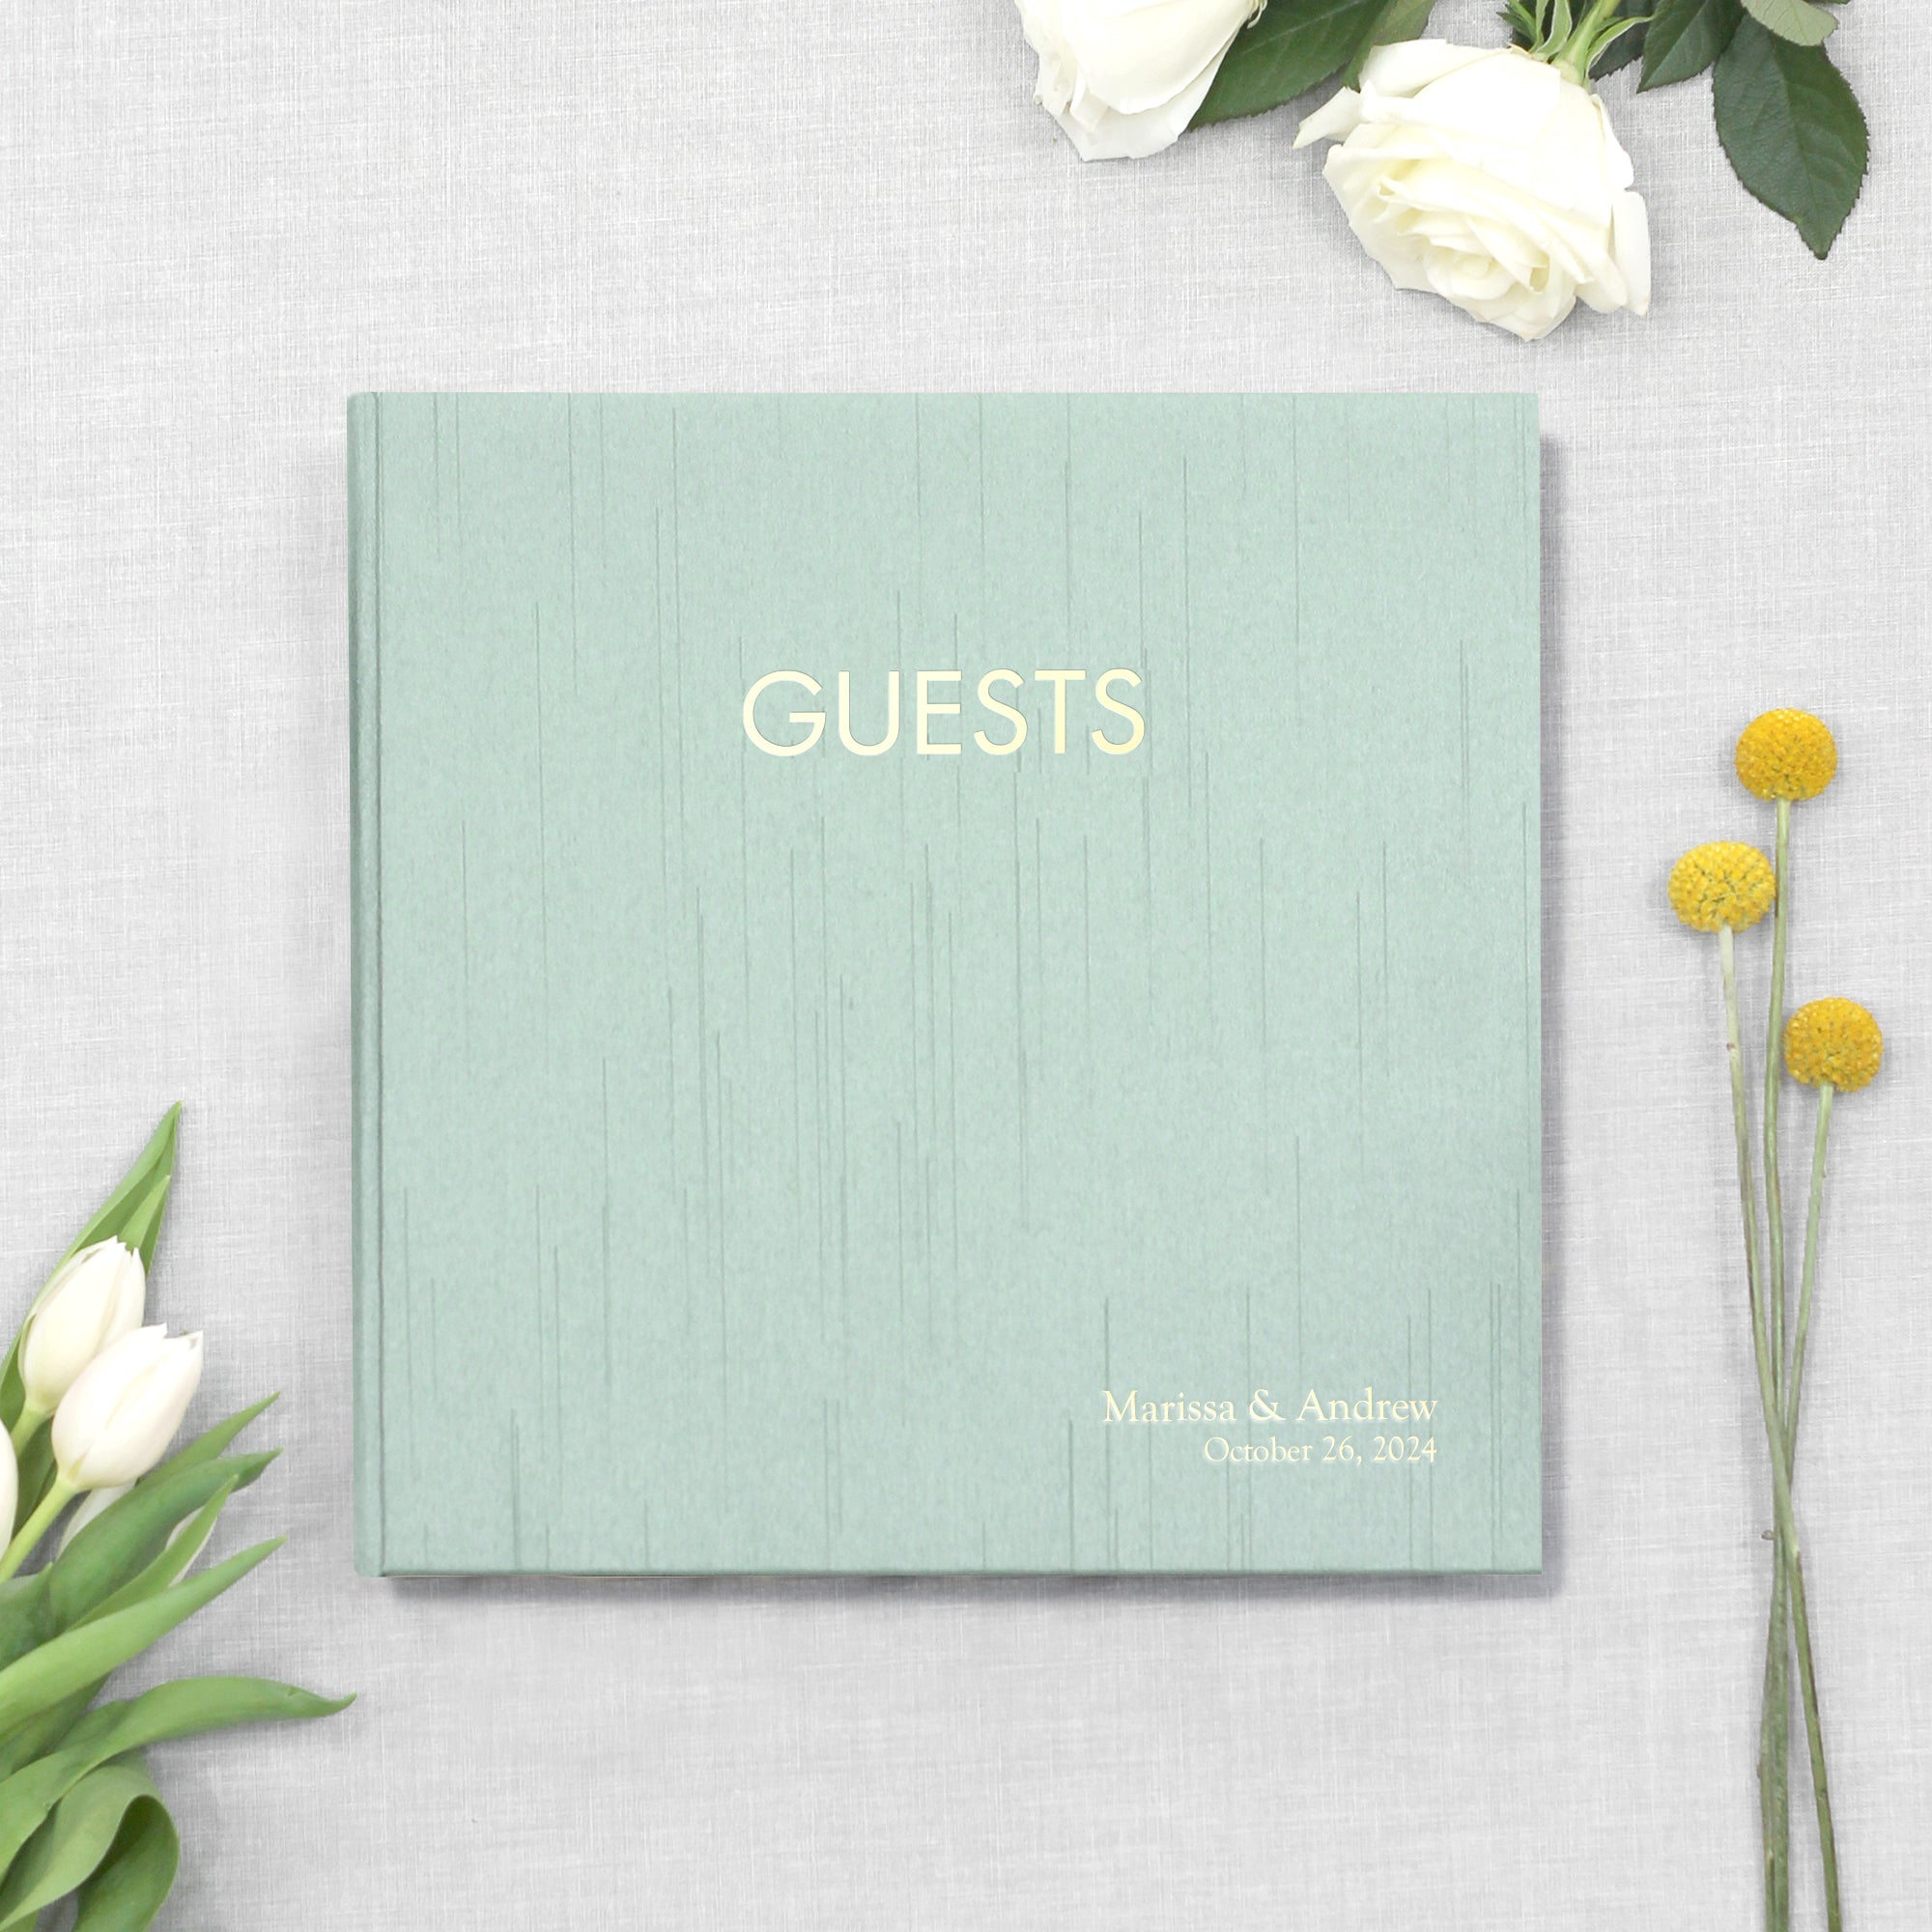 Personalized Event Guestbook